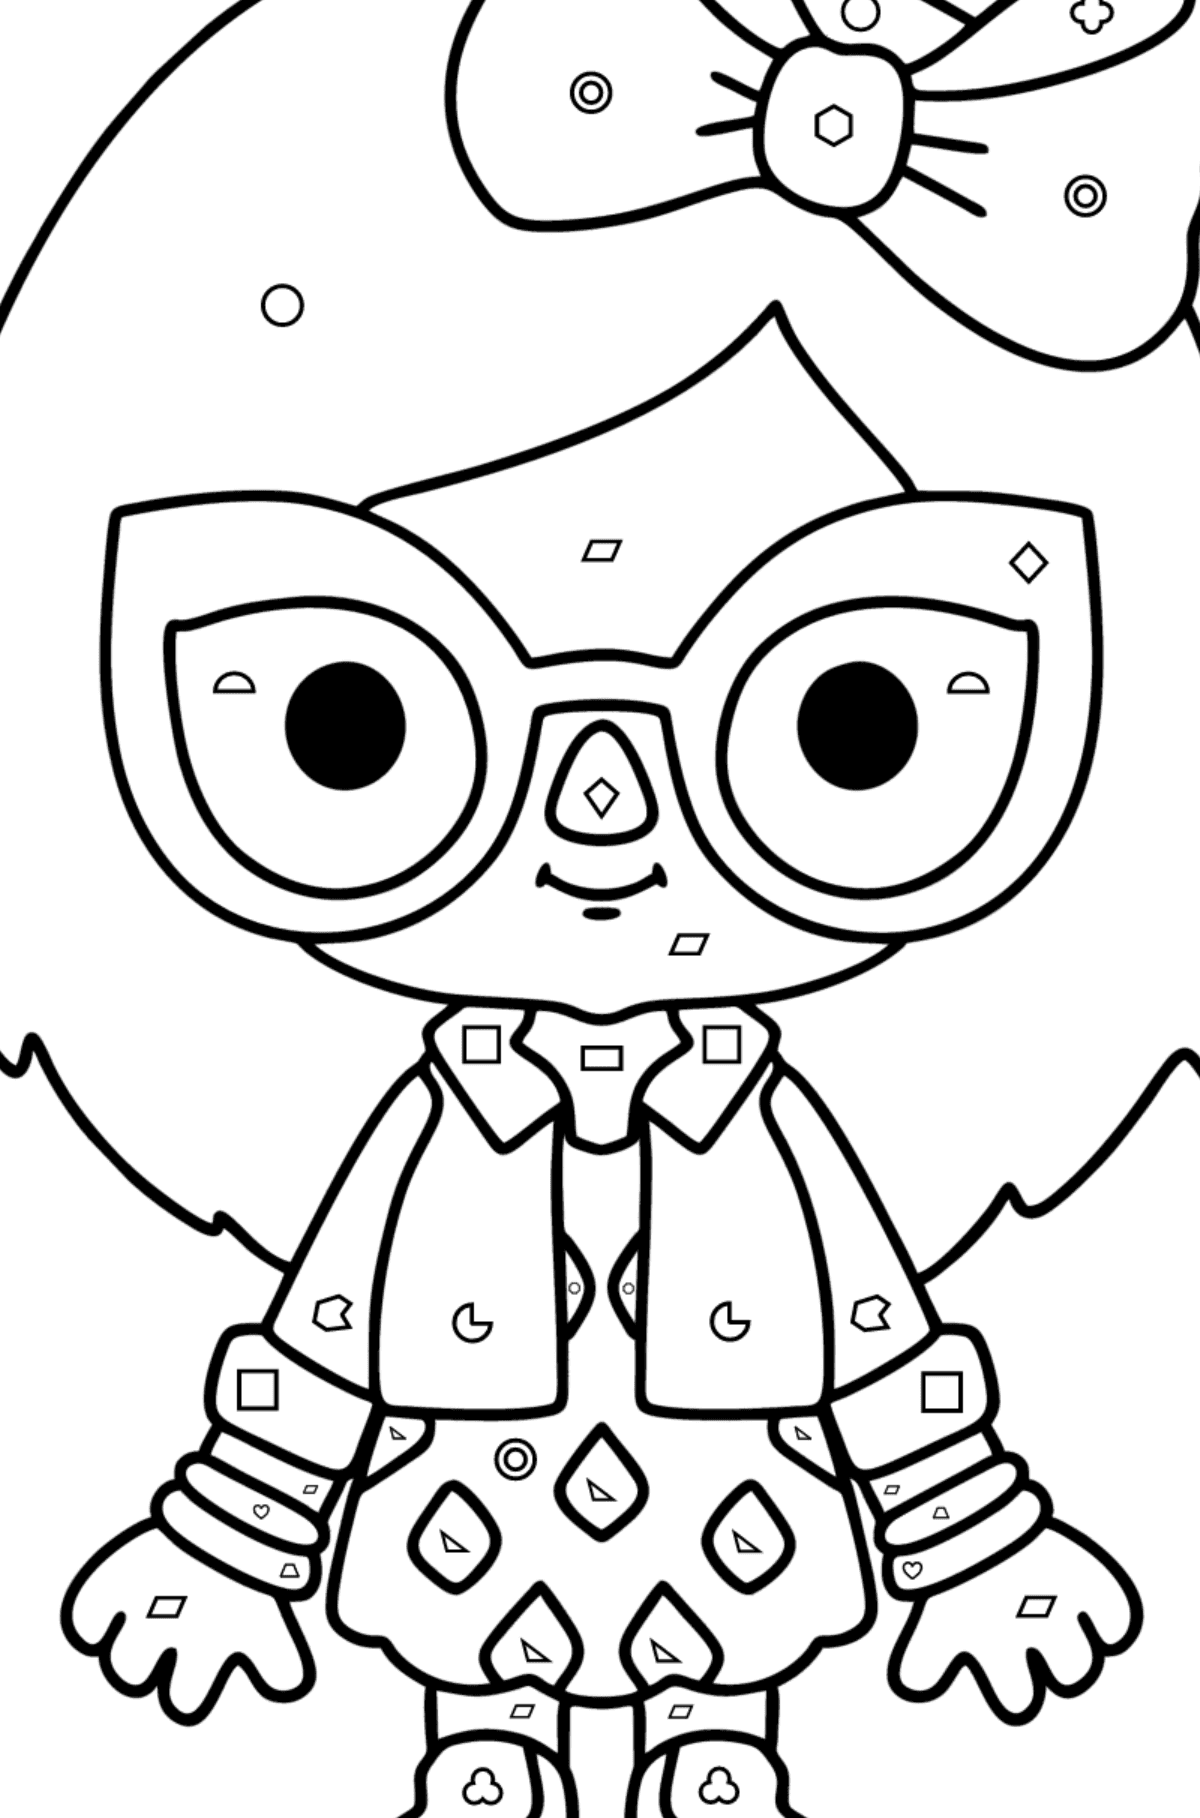 Colouring page Girl tocaboca 01 - Coloring by Geometric Shapes for Kids